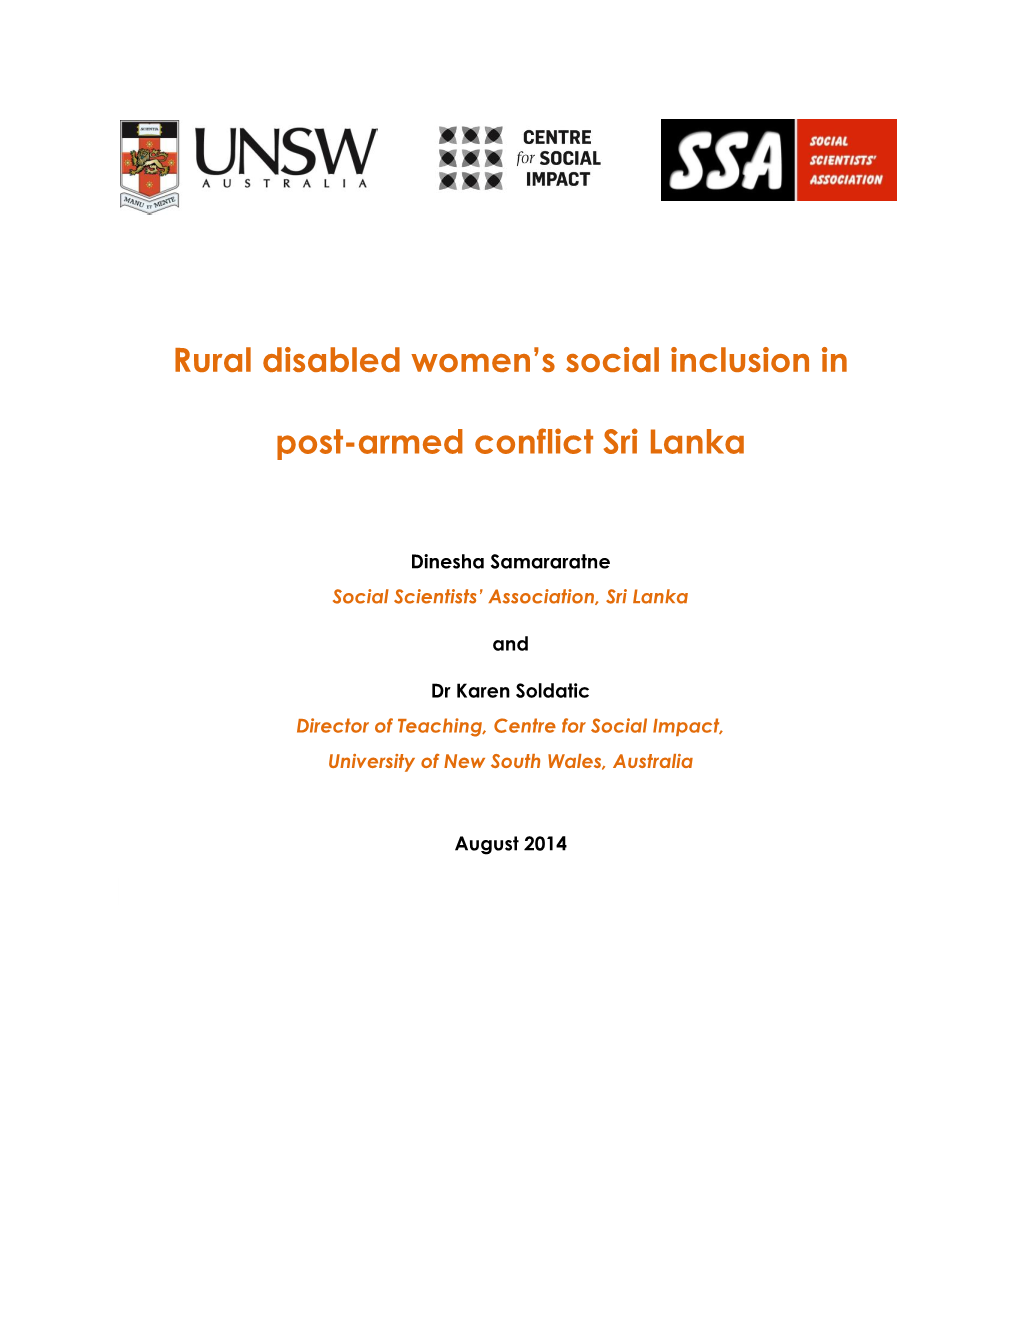 Rural Disabled Women's Social Inclusion in Post-Armed Conflict Sri